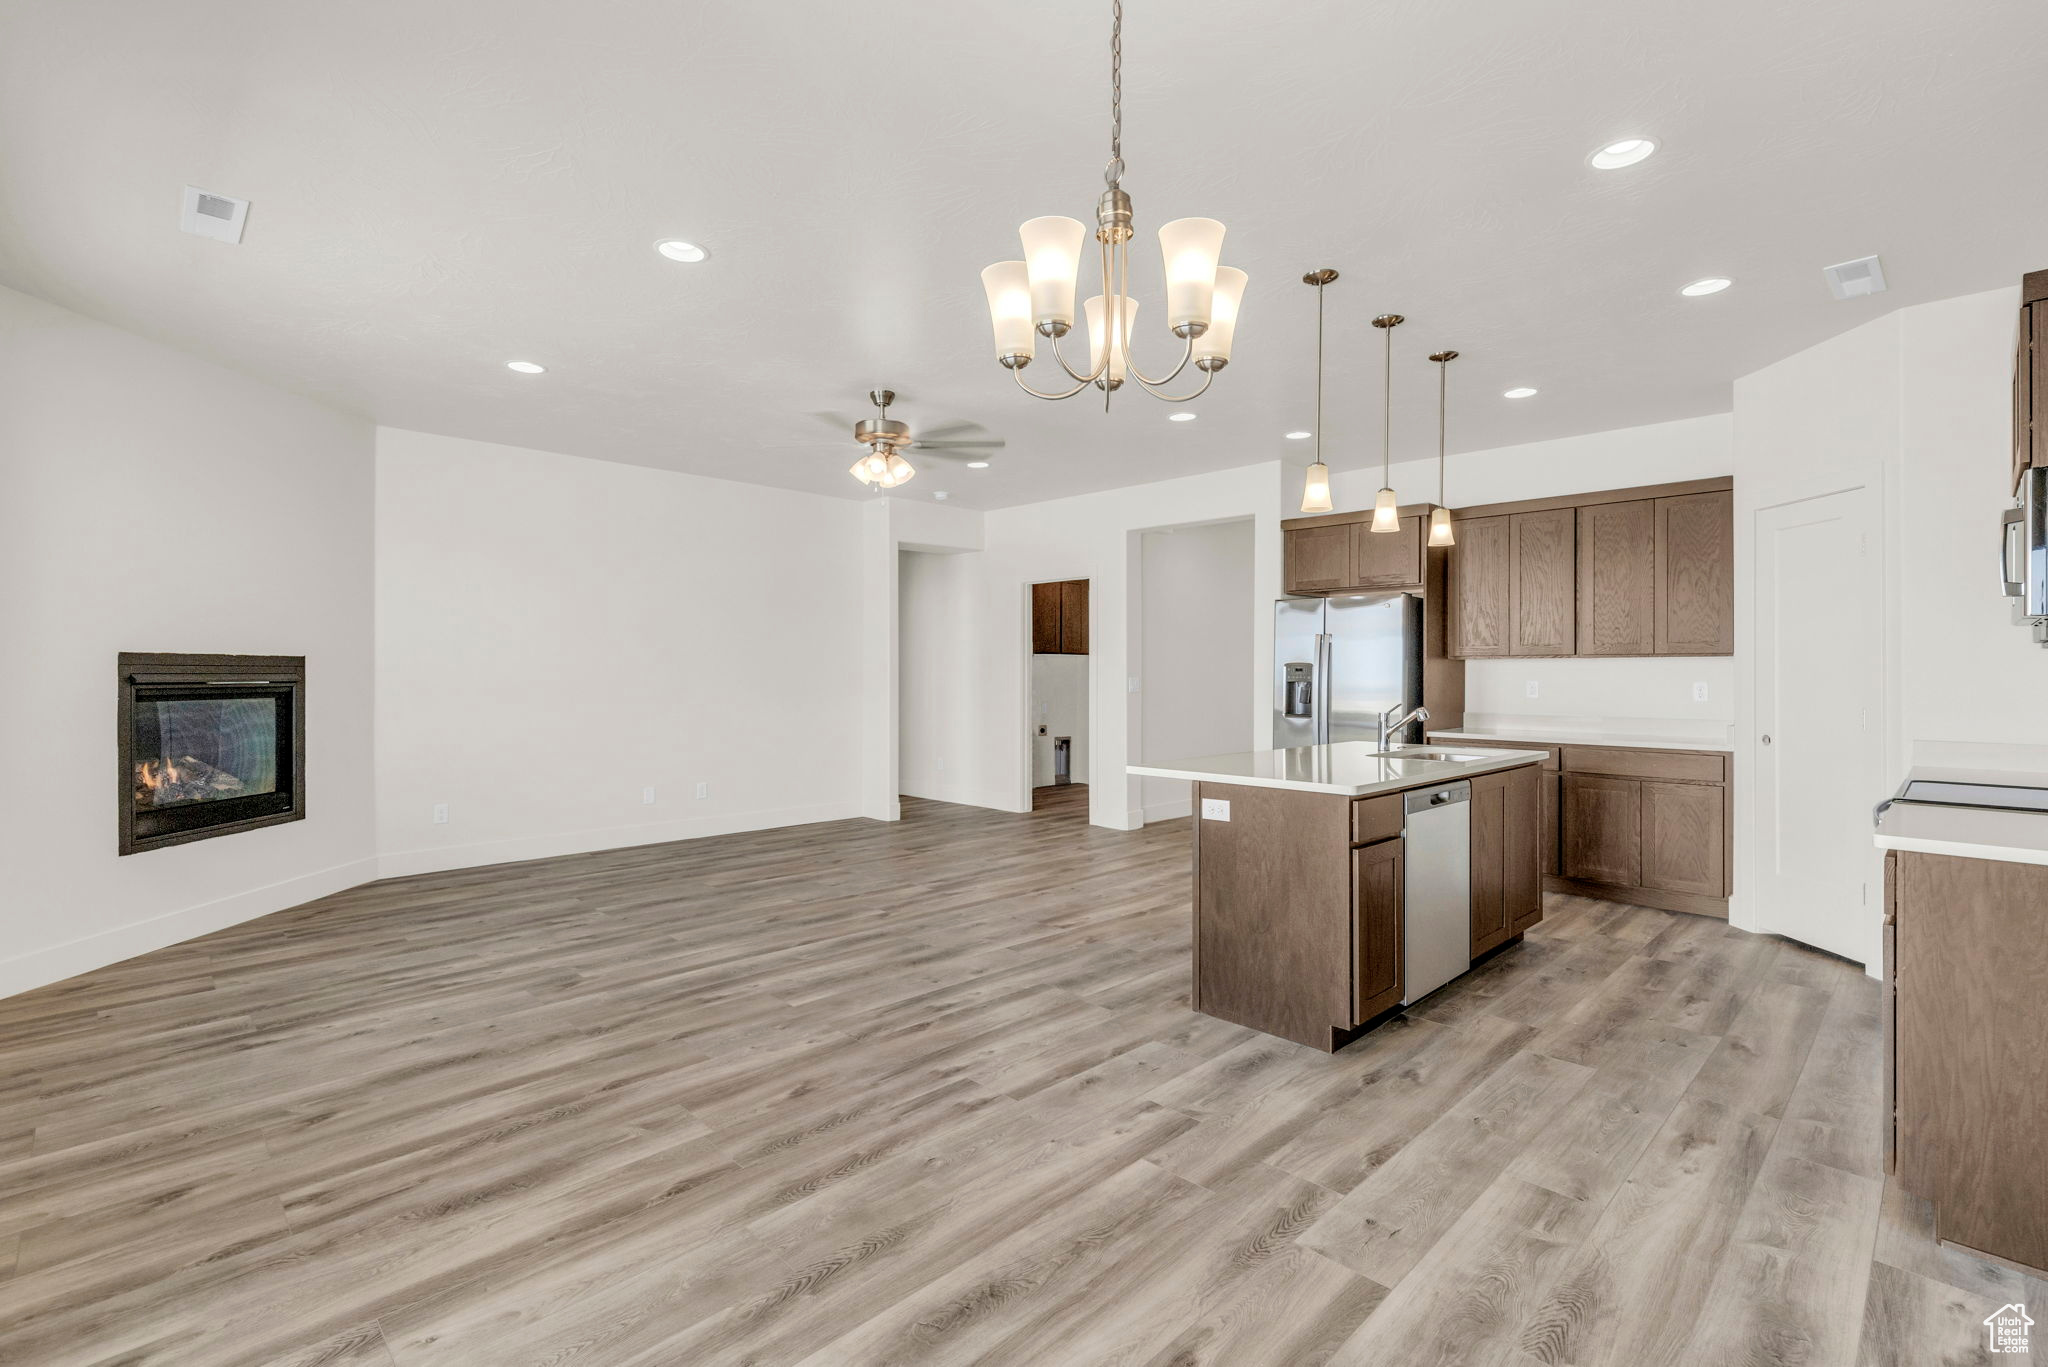 Kitchen with light wood-type flooring, ceiling fan with notable chandelier, an island with sink, pendant lighting, and appliances with stainless steel finishes